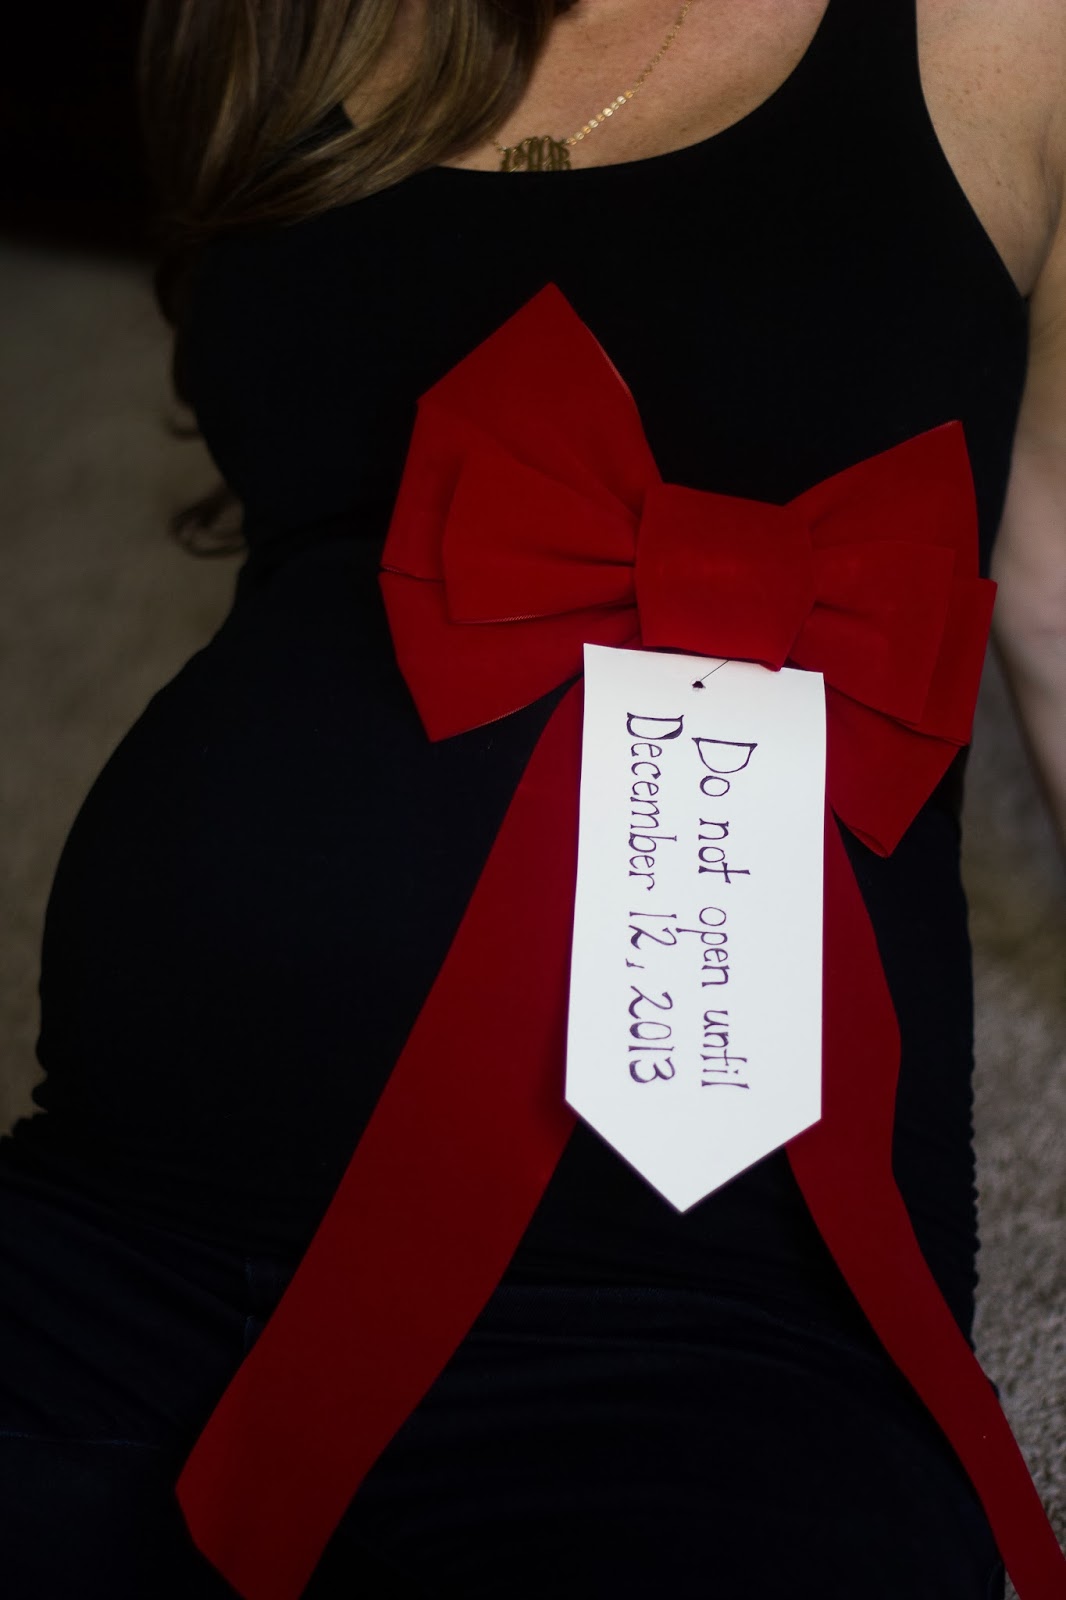 Do not open until due date maternity photo